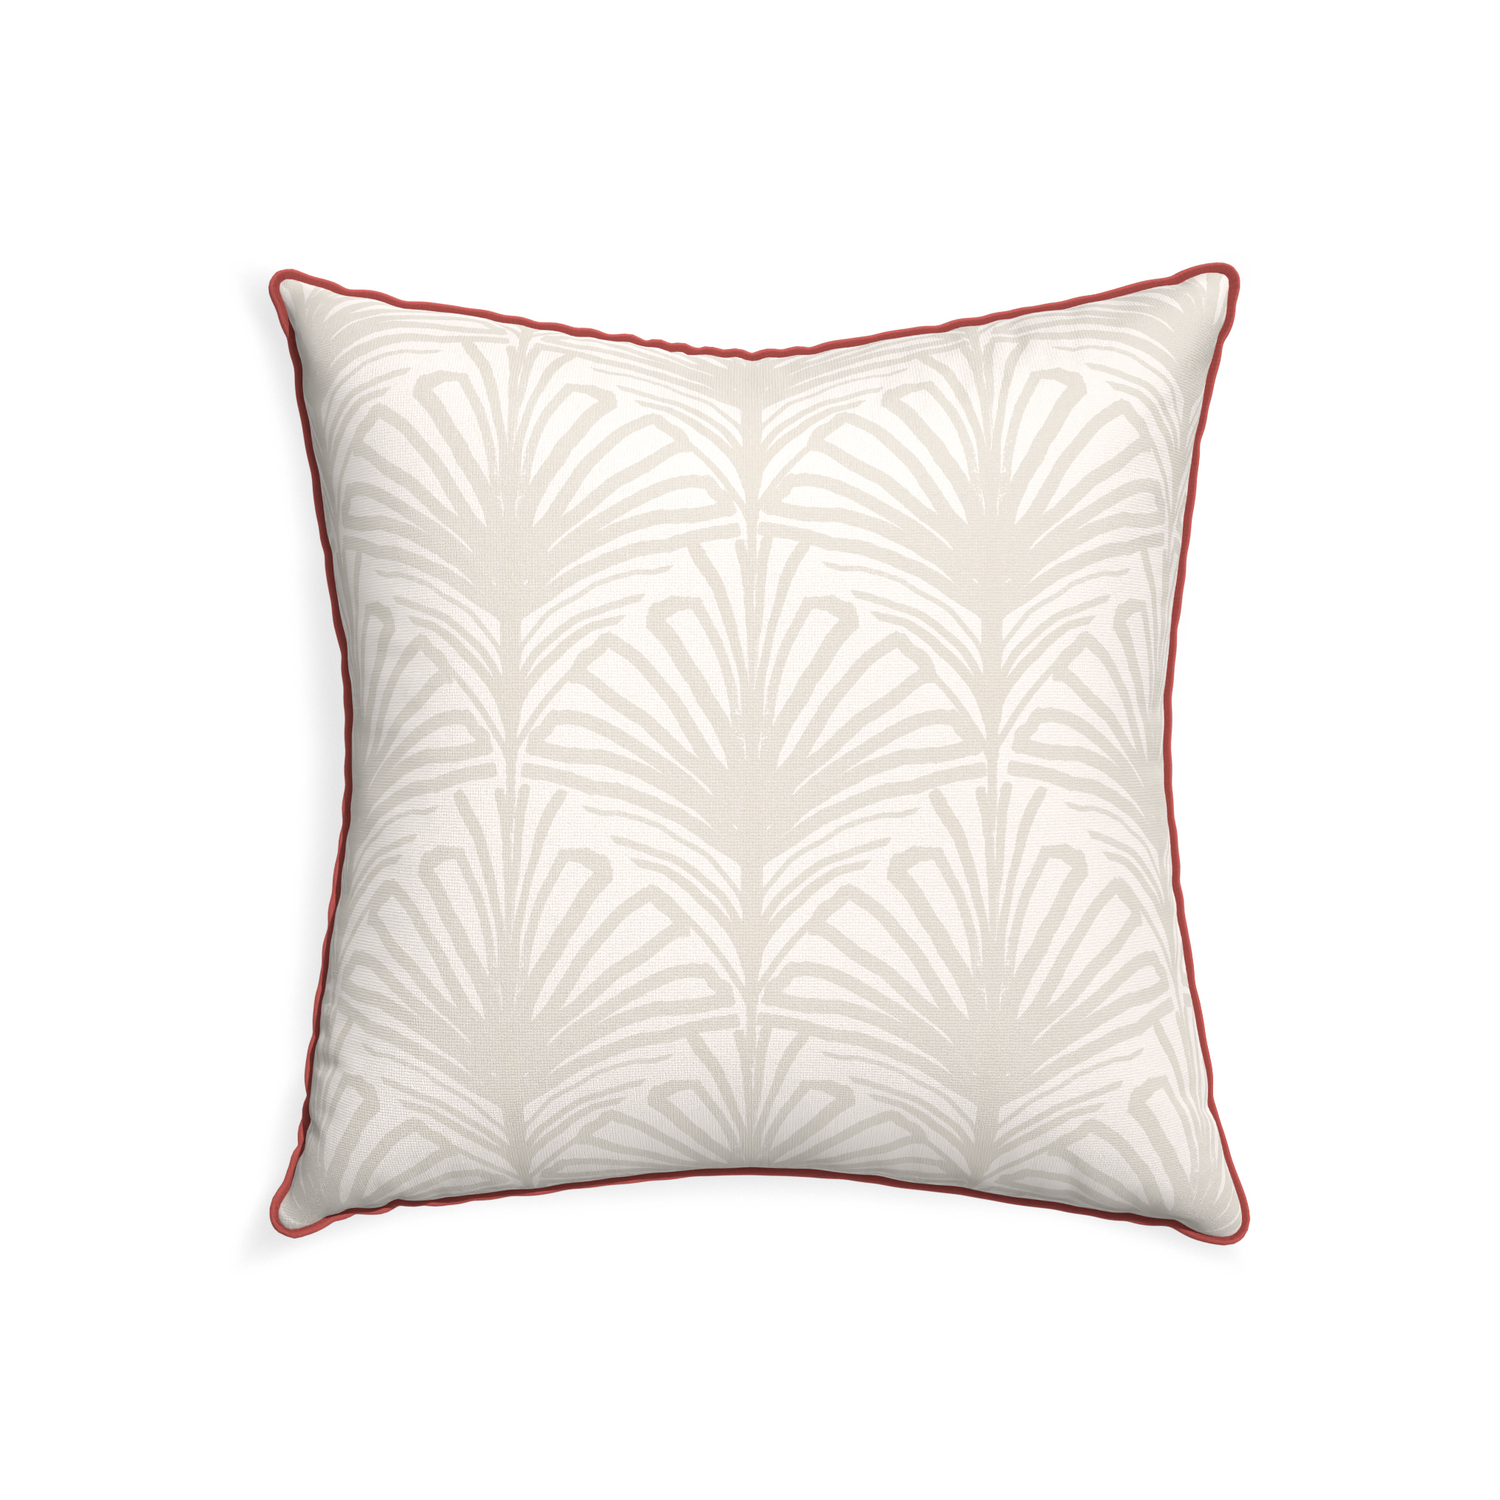 22-square suzy sand custom pillow with c piping on white background